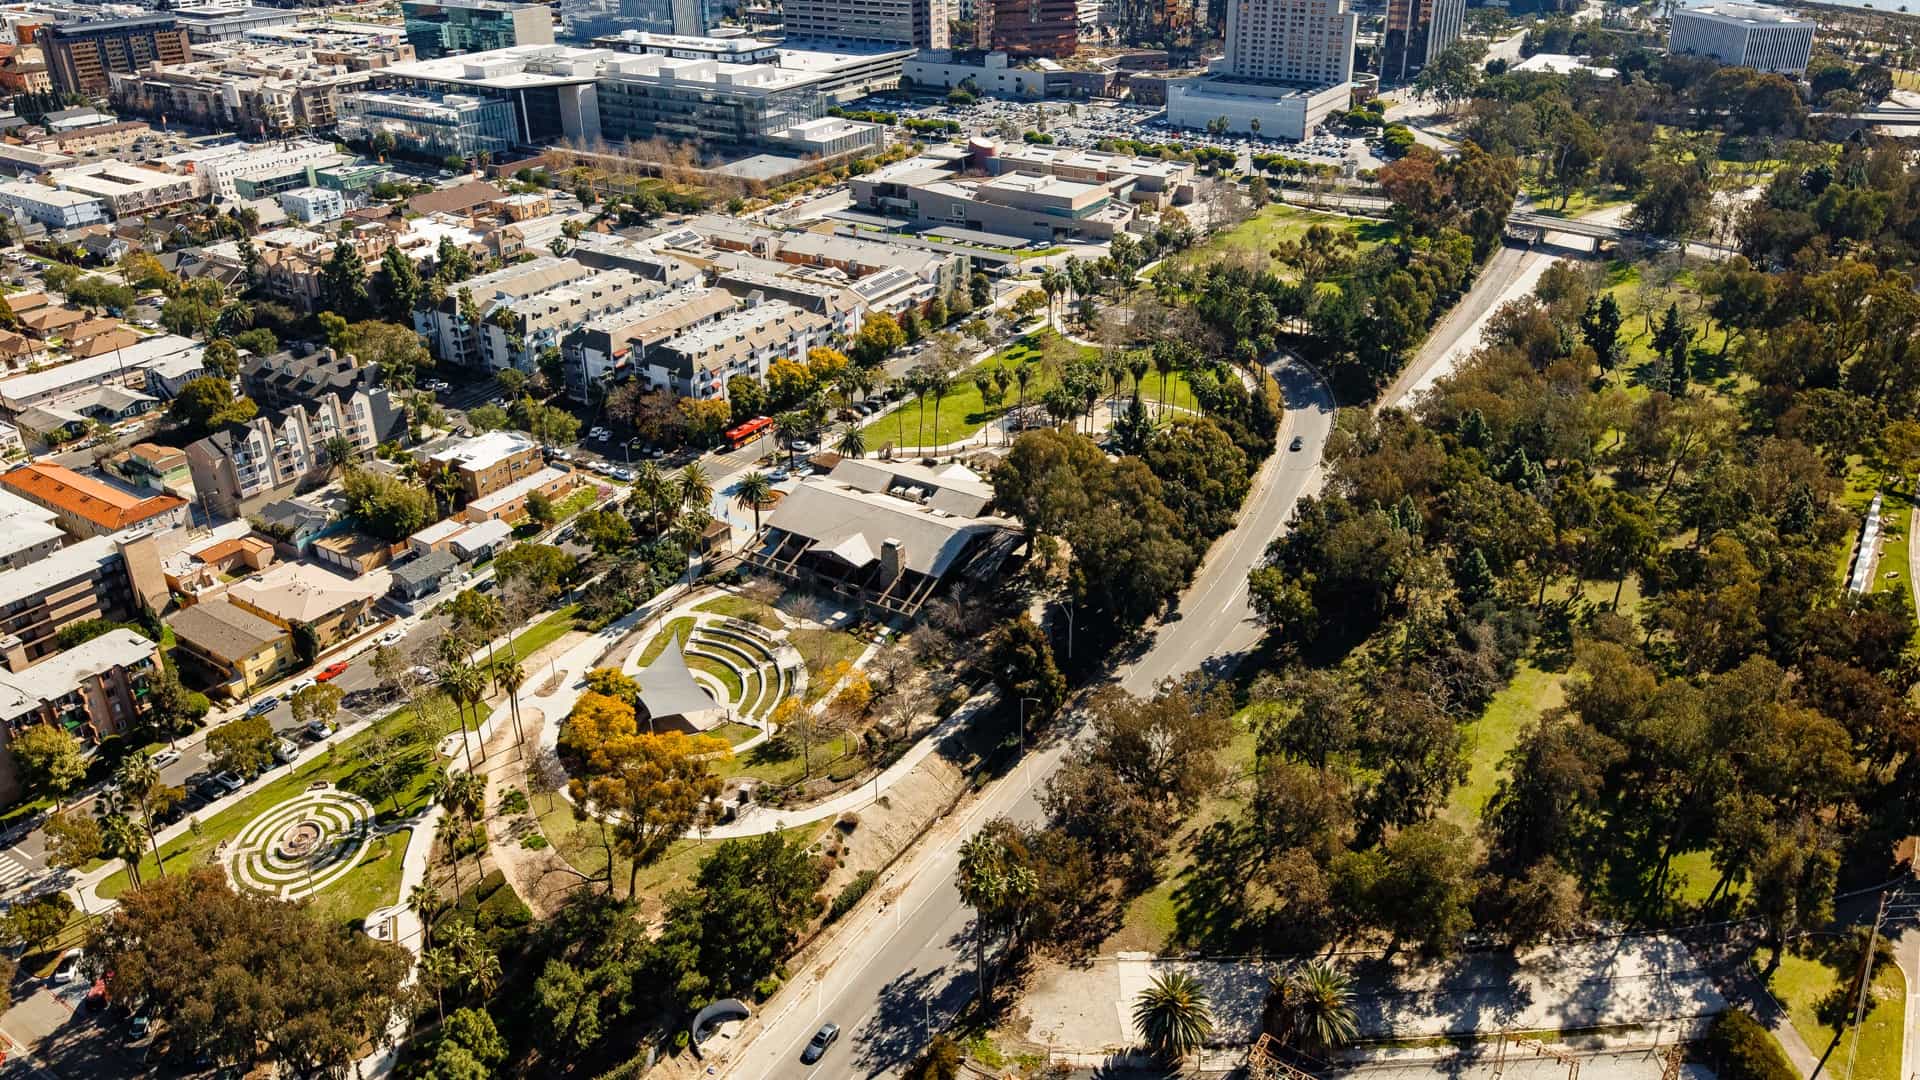 Aerial photo of Chavez Park in Long Beach, CA